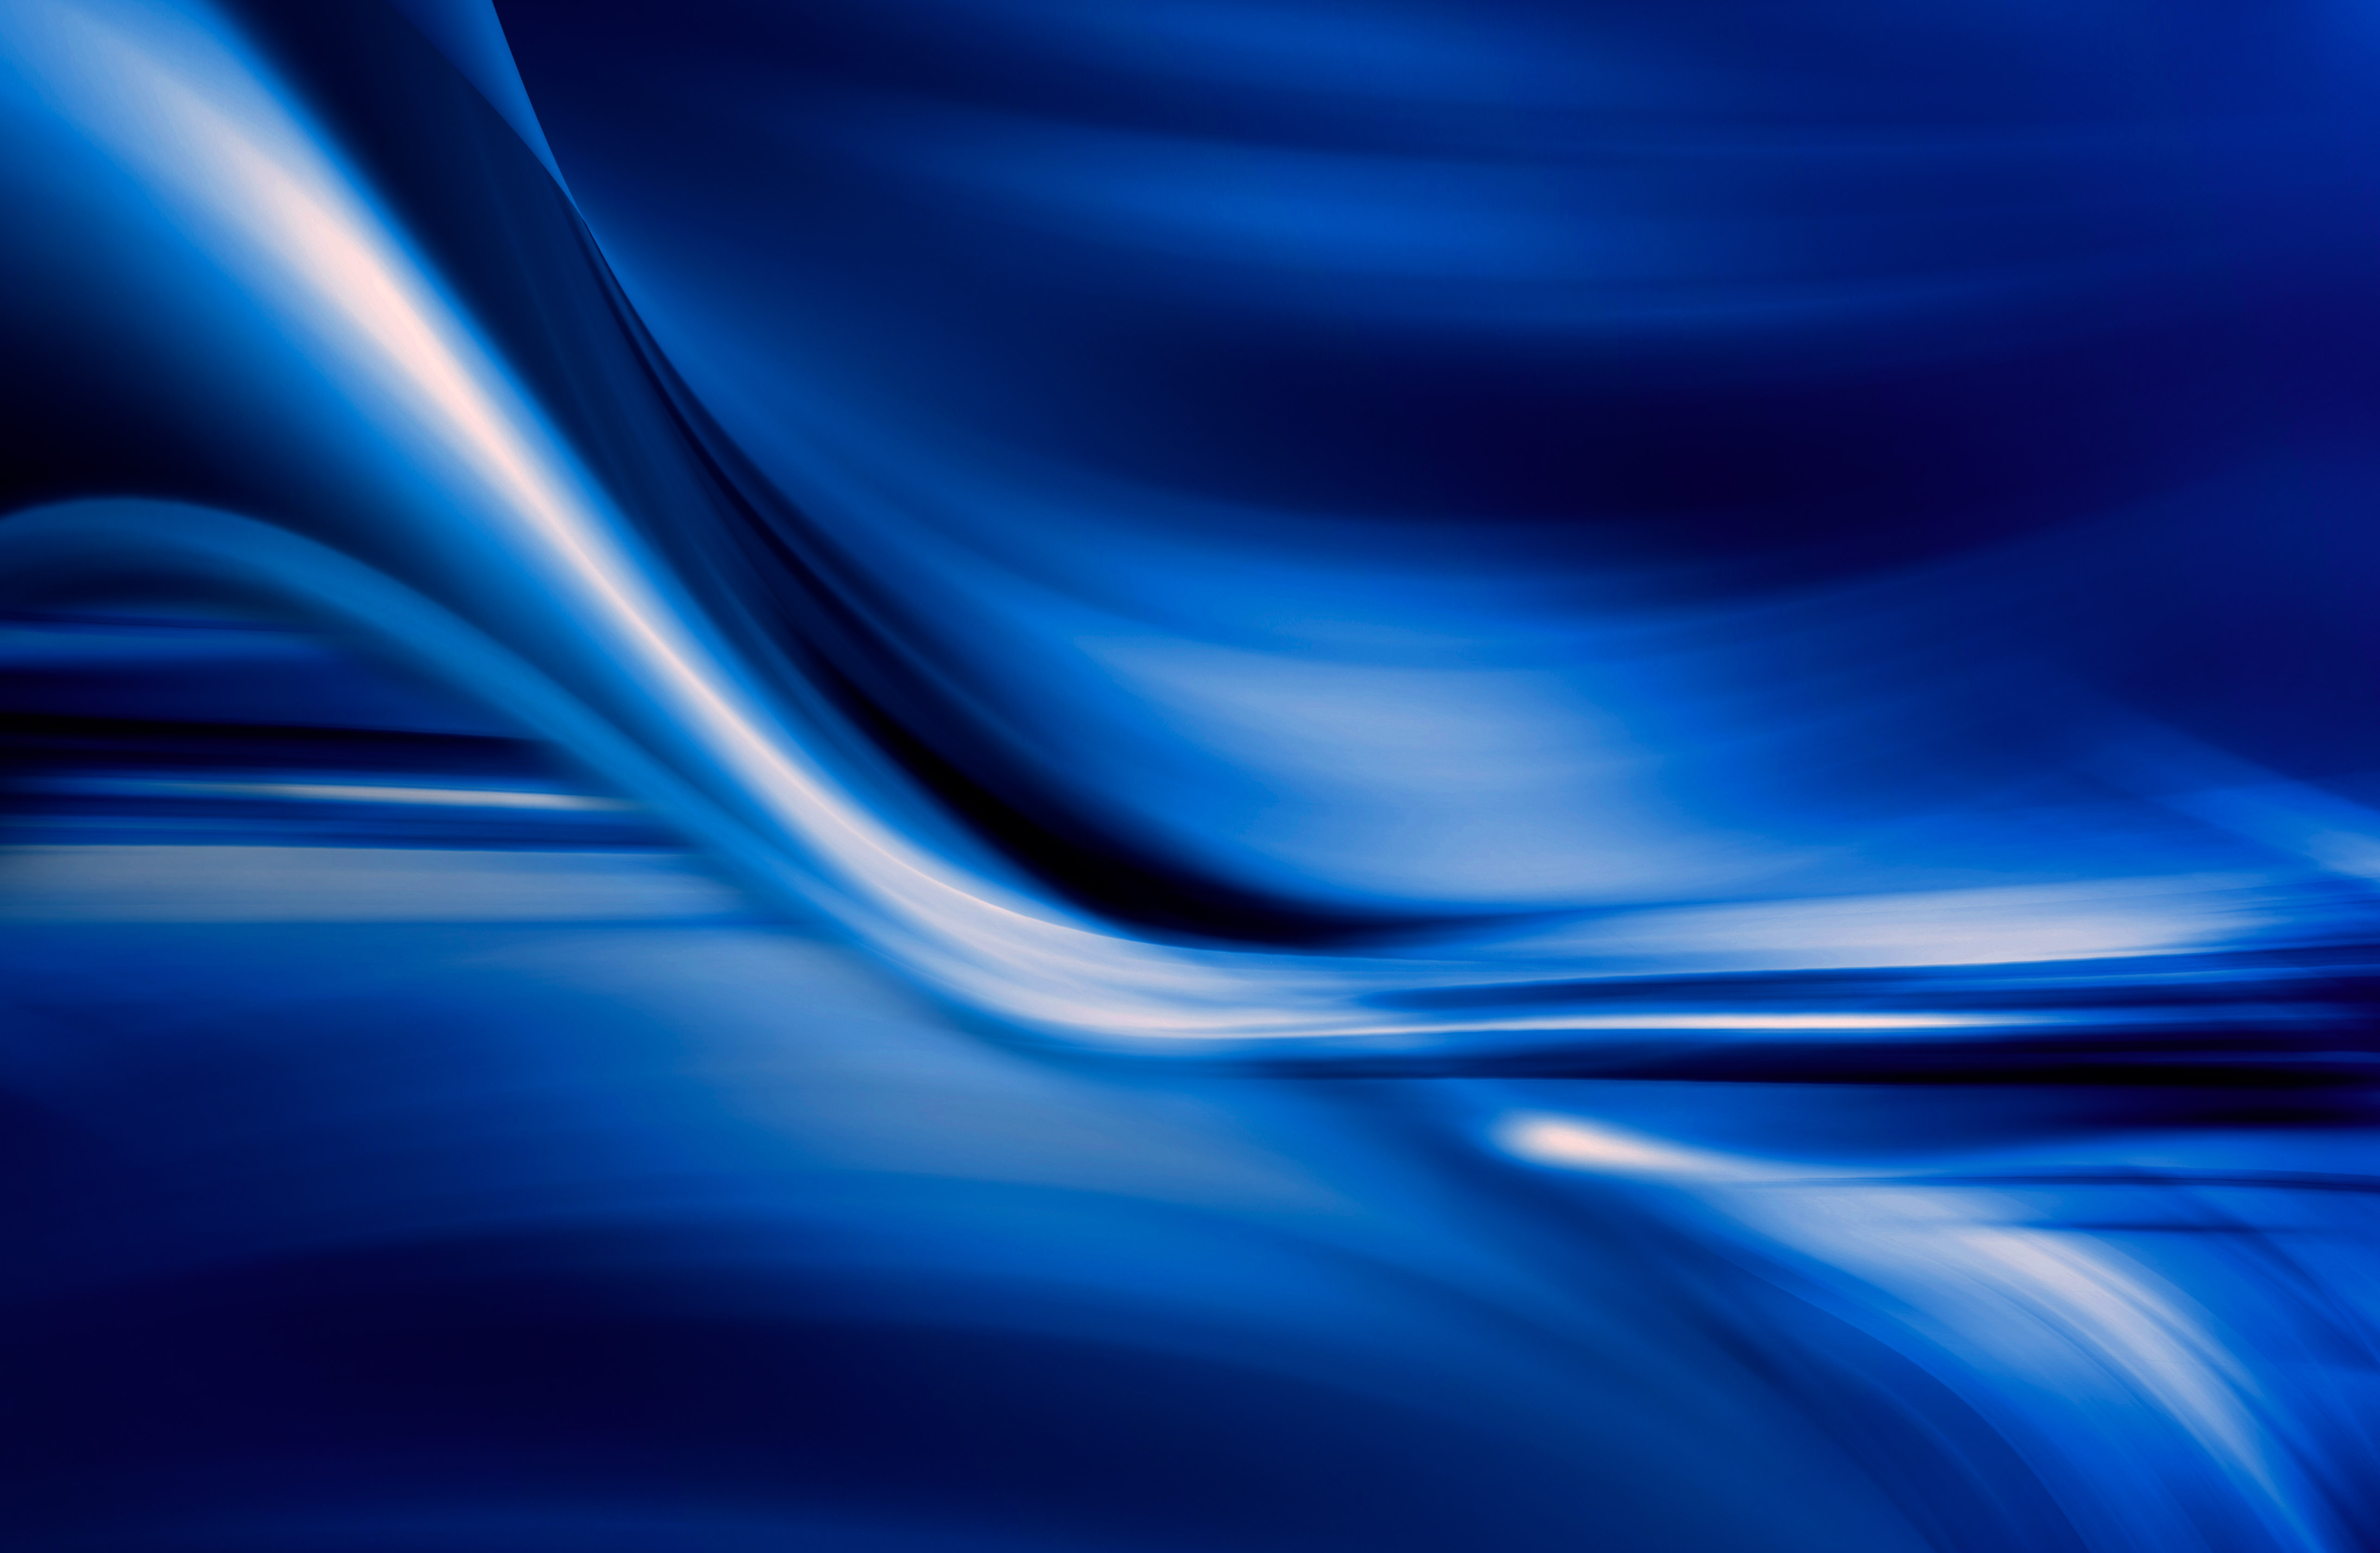 Deep Dark Blue Abstract Background Image Mytextures